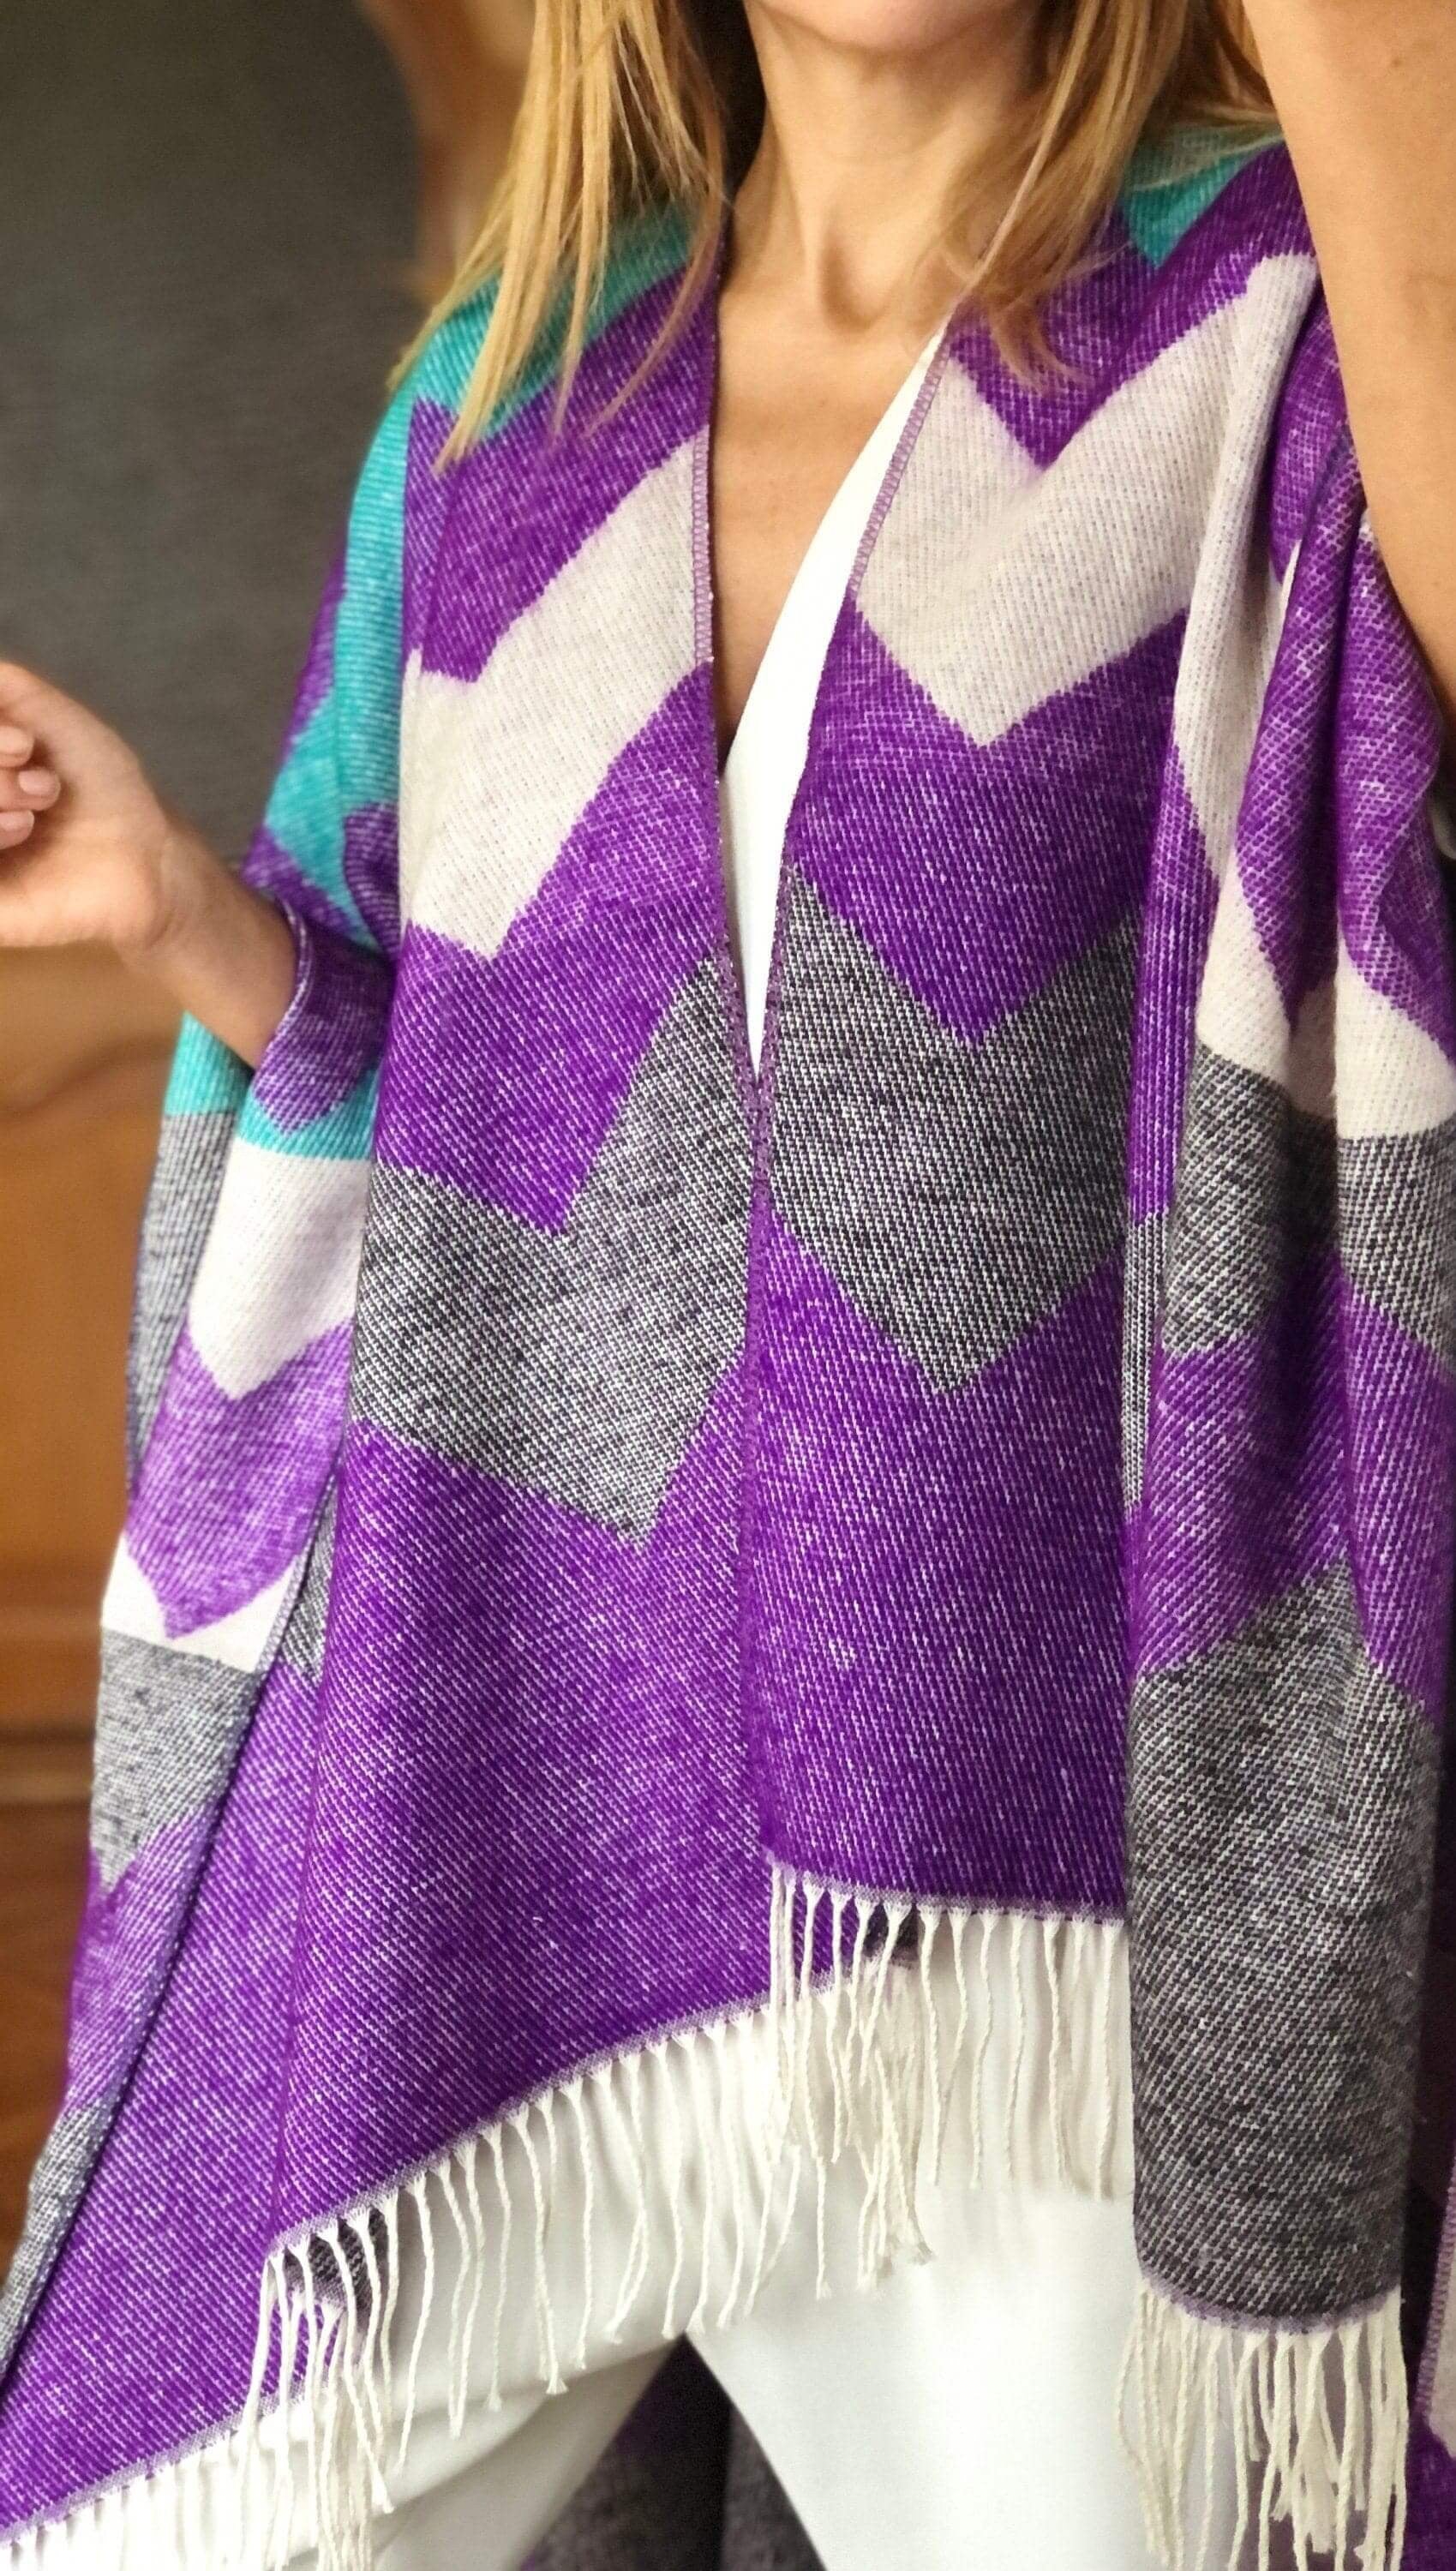 Stylish poncho in purple, gray, white, and blue colors